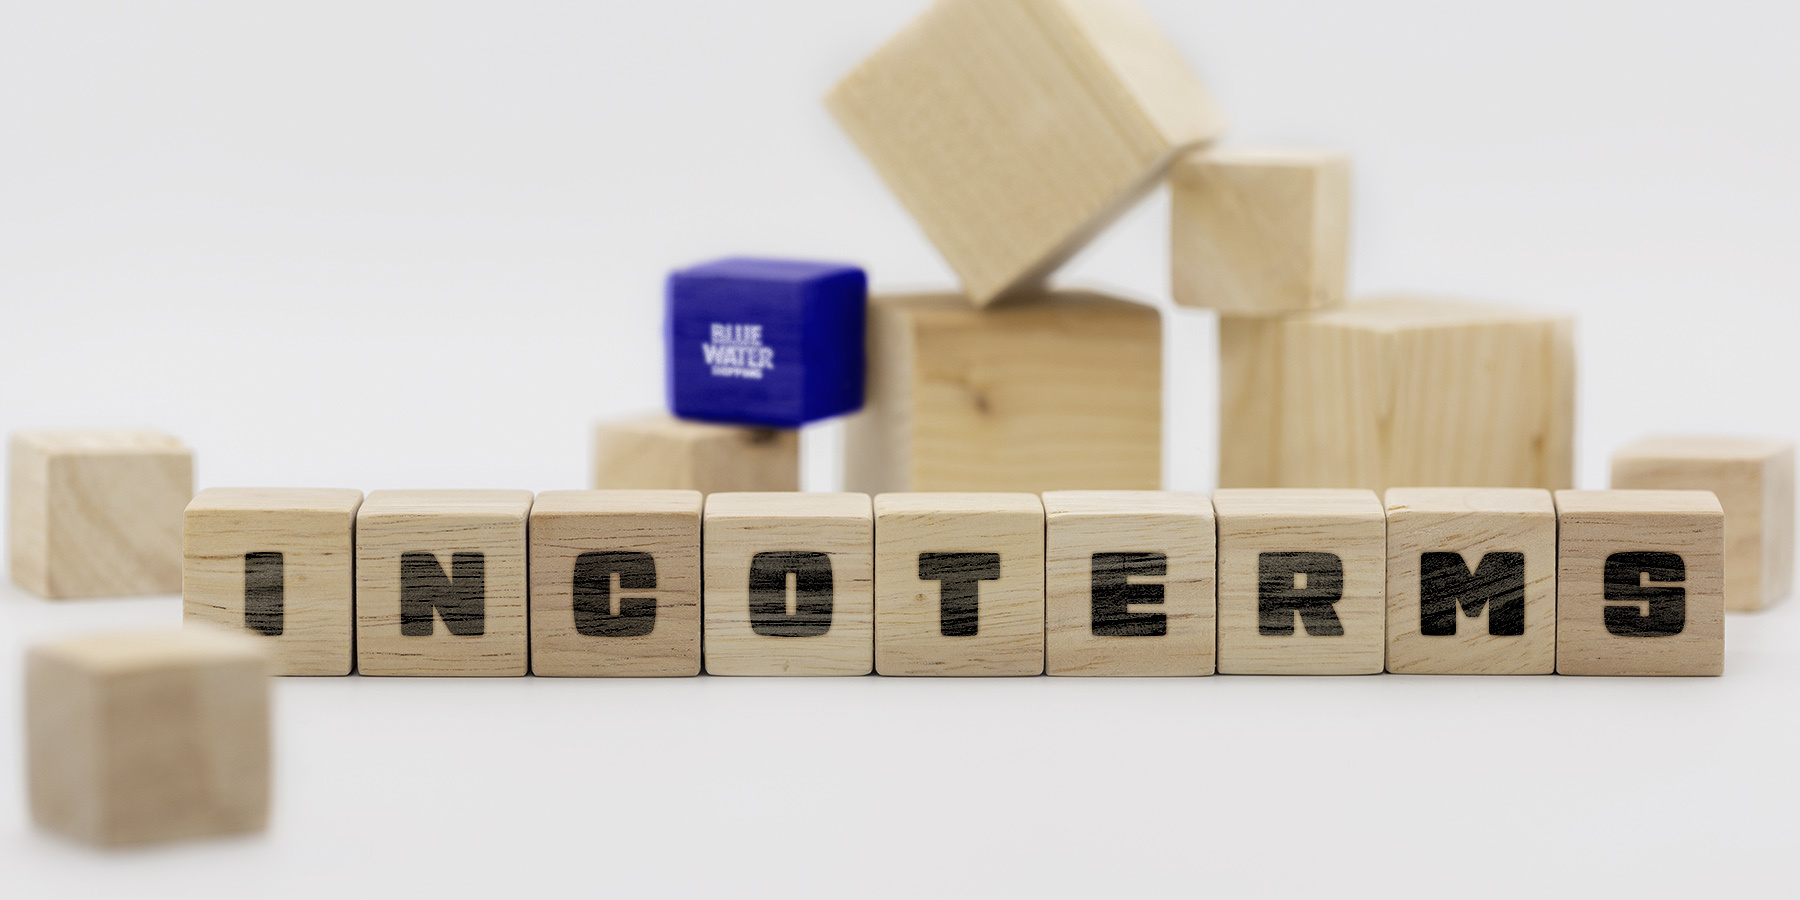 All You Need To Know About Incoterms Learn From Blue Water